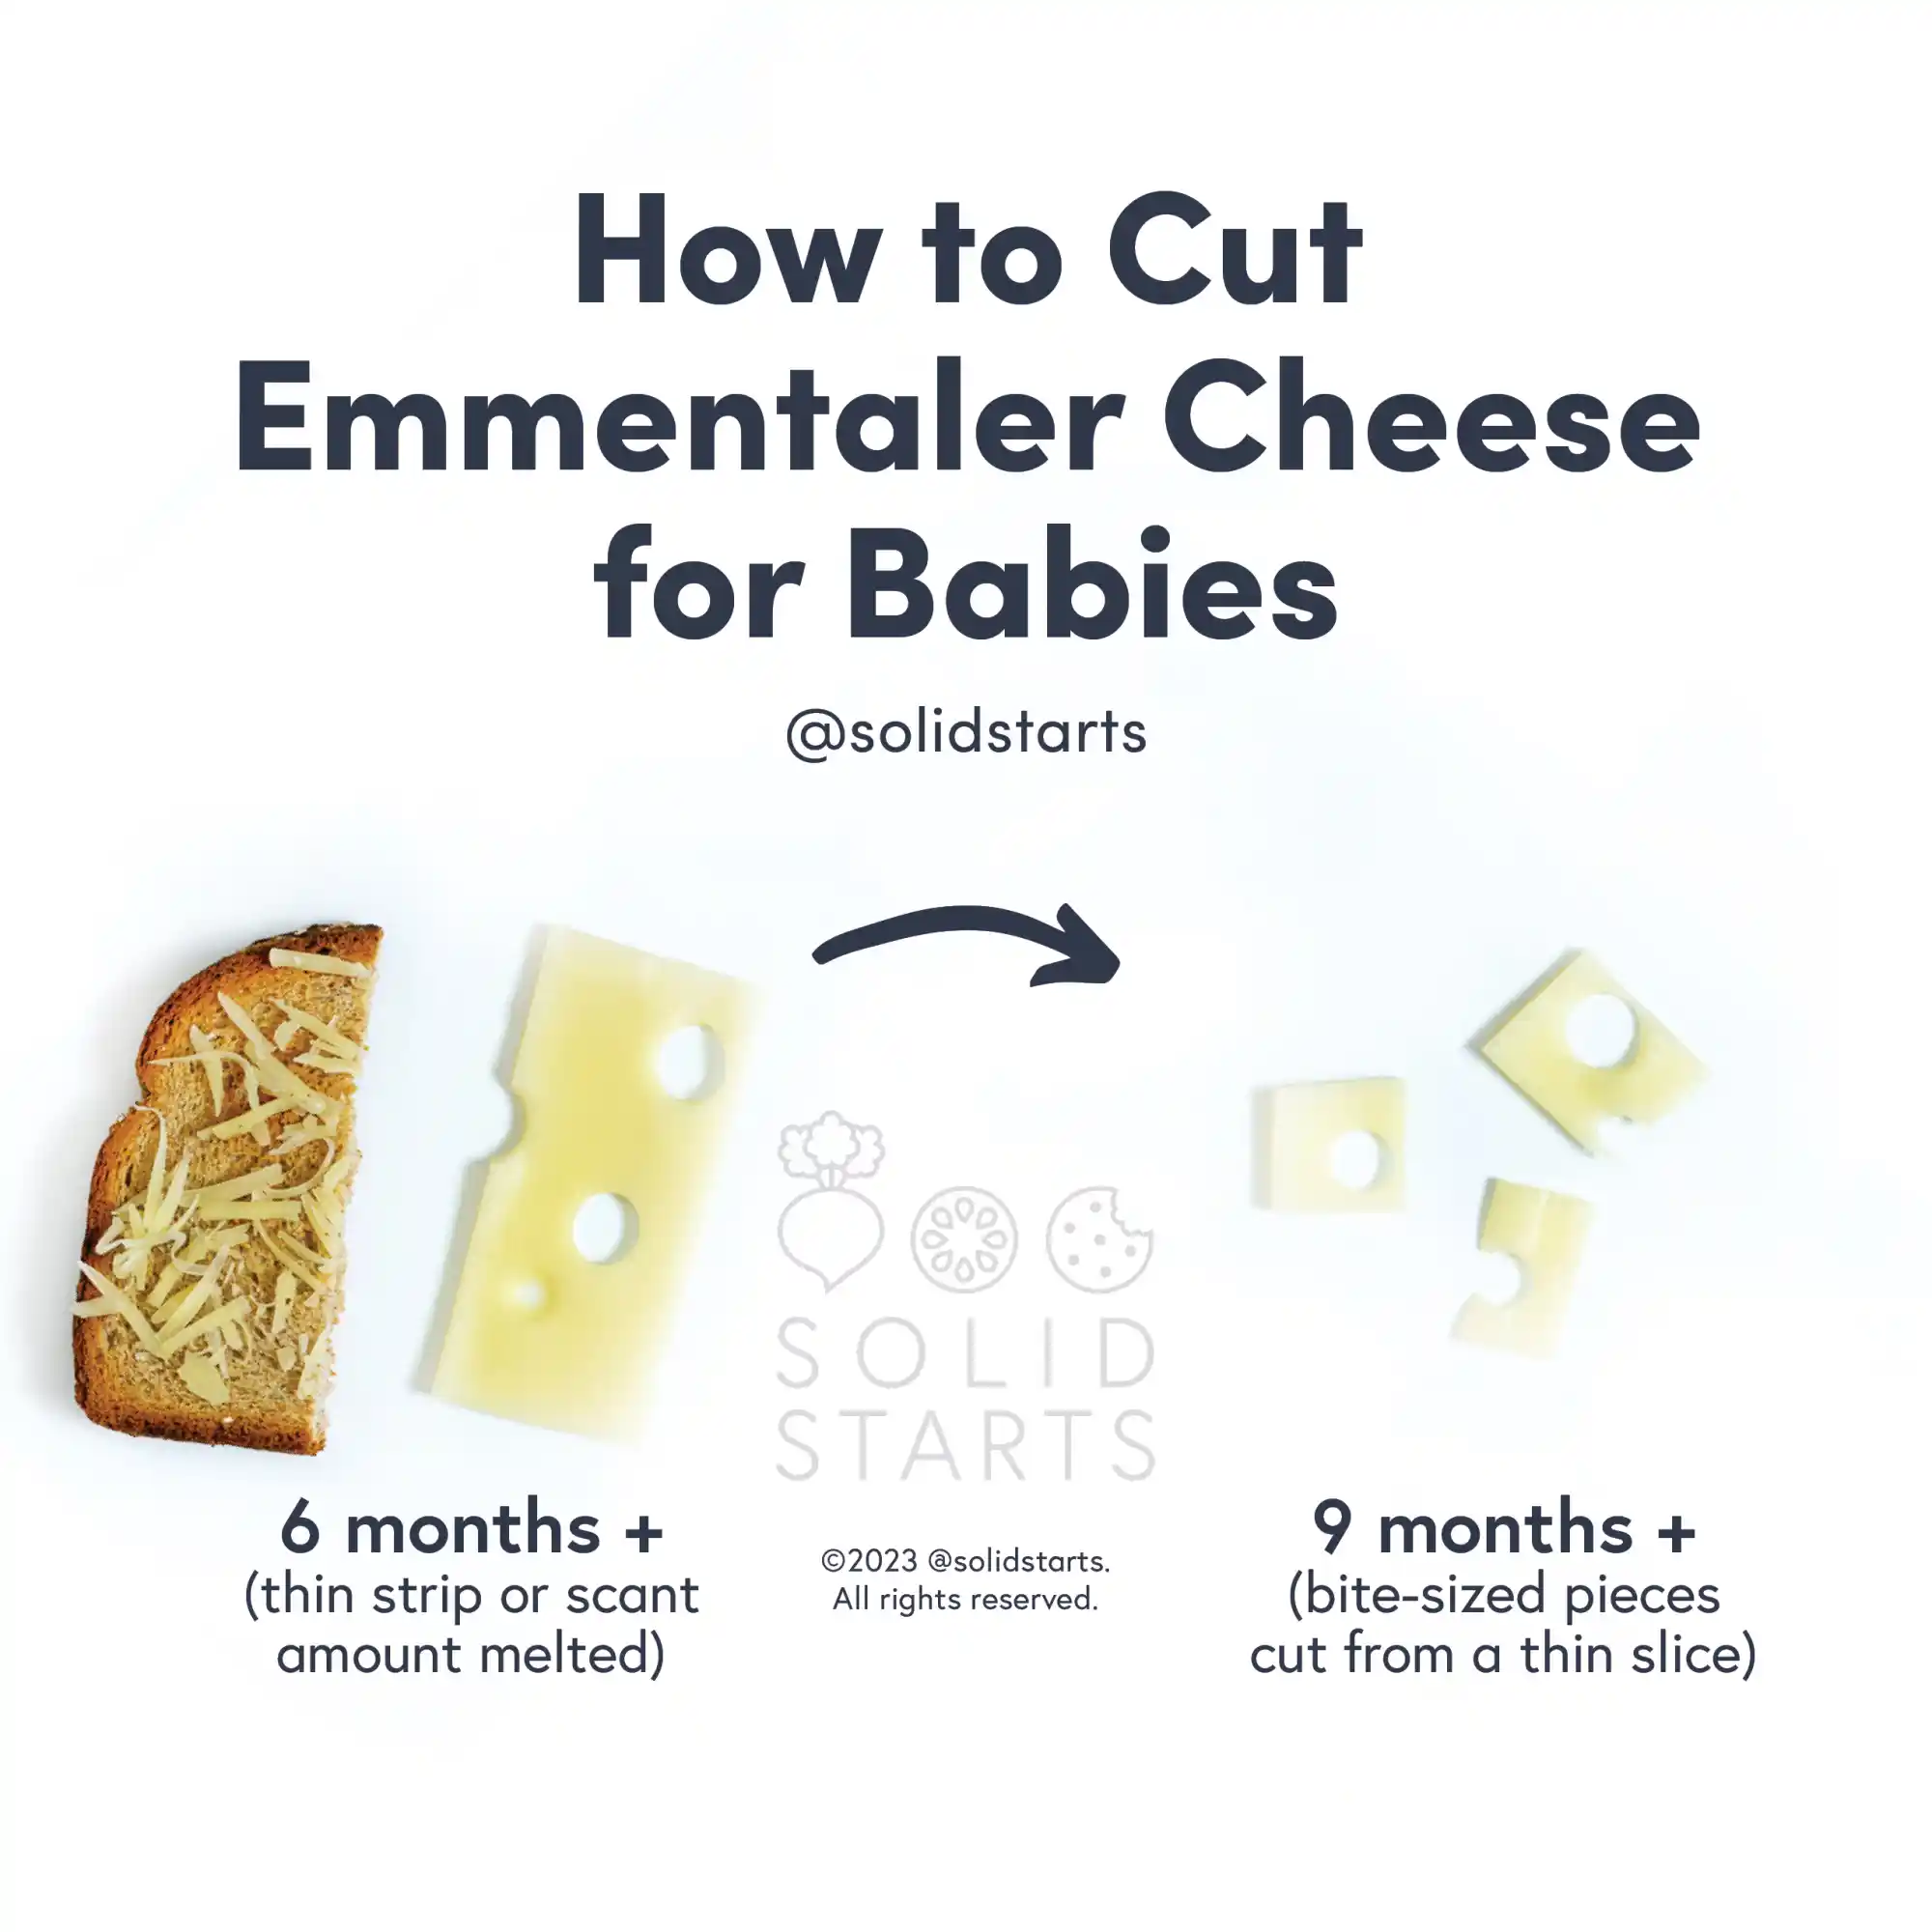 How to Cut Emmentaler Cheese for Babies